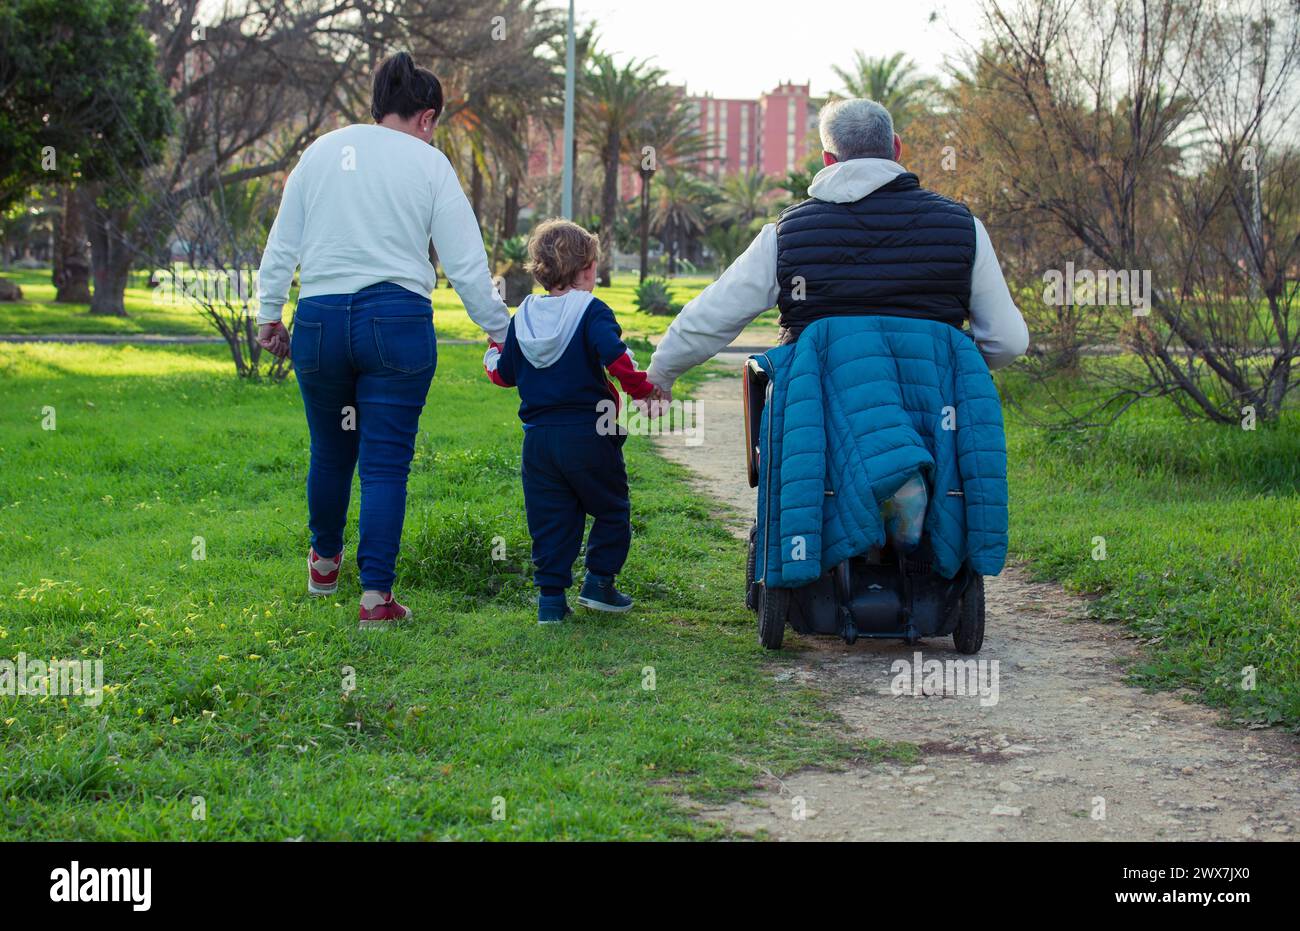 despite being in a wheelchair is not a problem, to walk hand in hand with his family in the park. Stock Photo